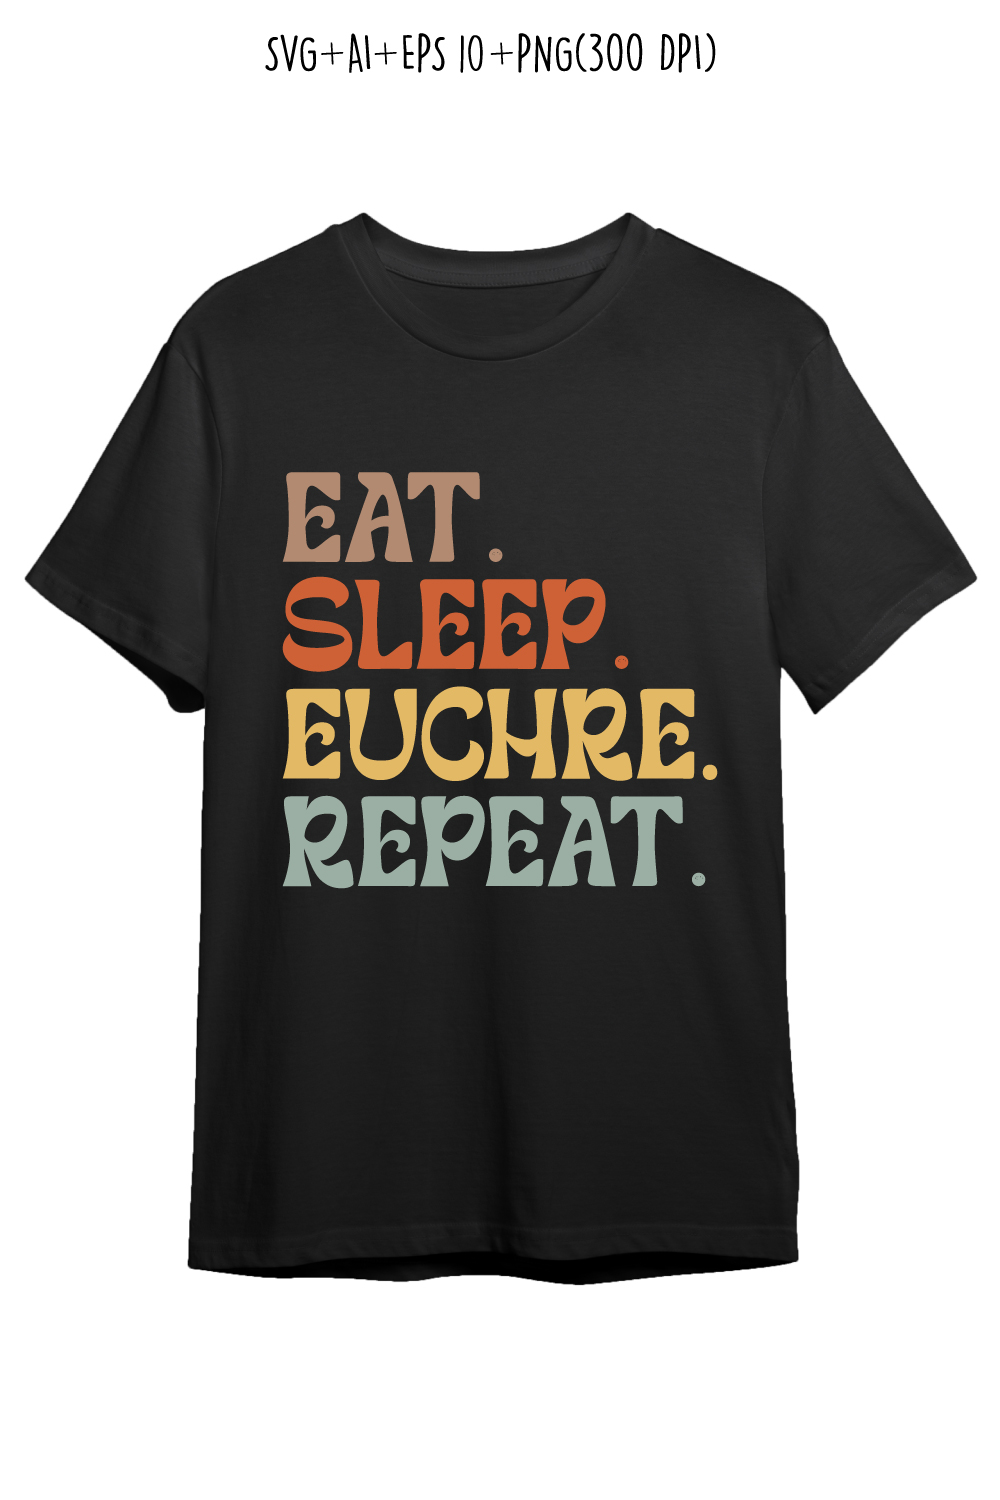 Eat Sleep Euchre Repeat indoor game typography design for t-shirts, cards, frame artwork, phone cases, bags, mugs, stickers, tumblers, print, etc pinterest preview image.